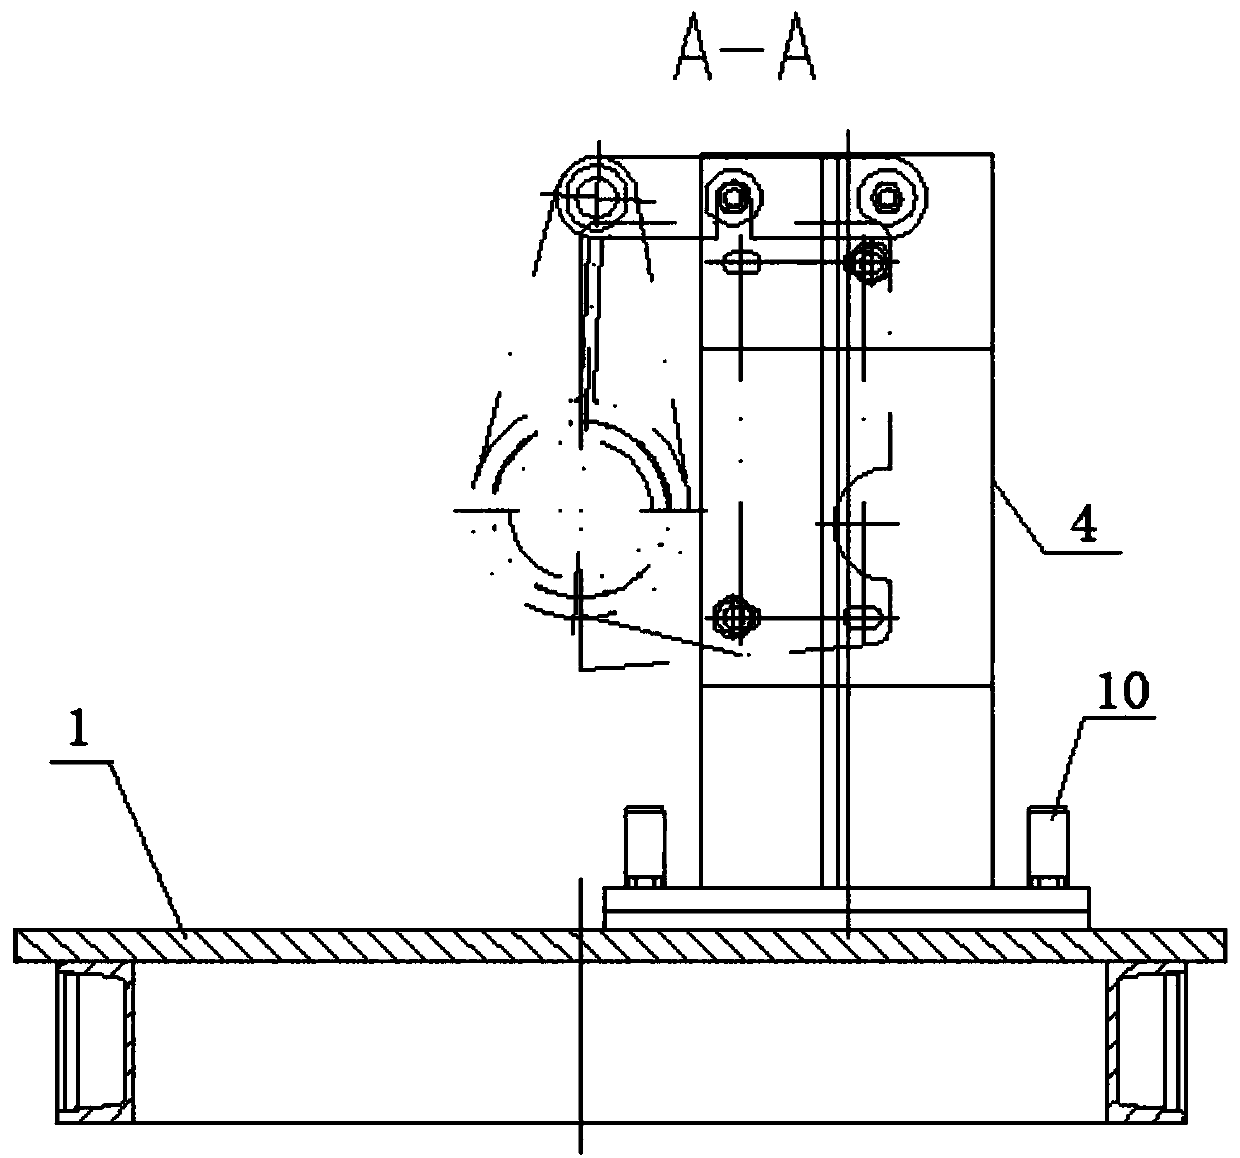 Welding positioning device for vehicle front air storage cylinder assembly